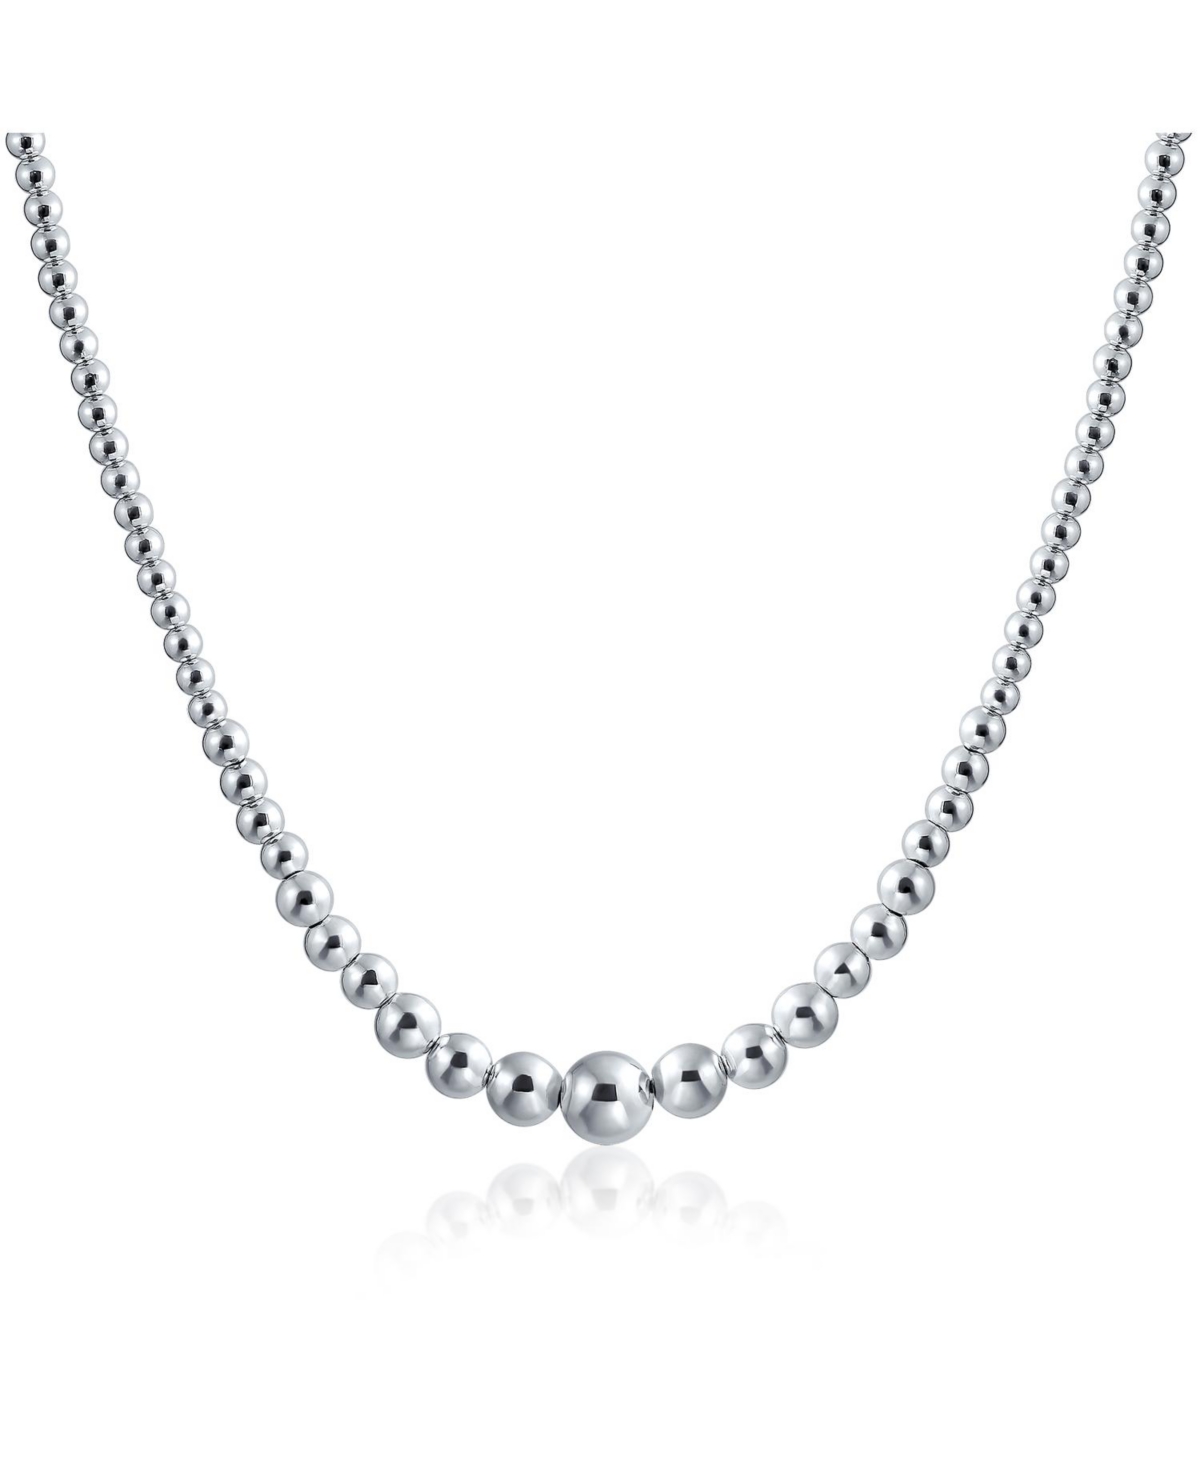 Traditional Classic Shinny Polished .925 Sterling Silver Graduated Round Lightweight Bead Ball Strand Necklace For Women 16 Inch Hand Strung - Silver